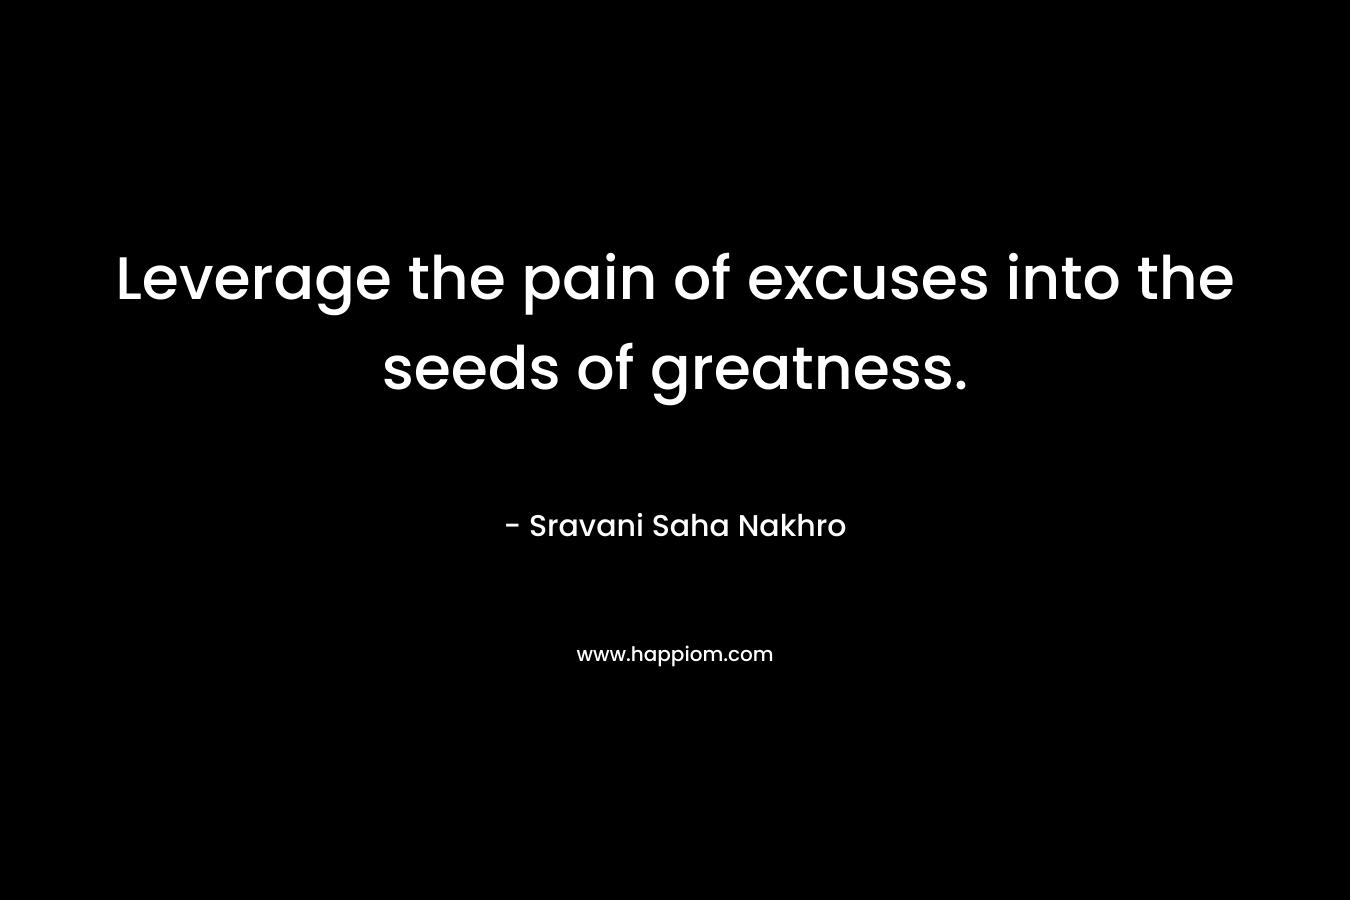 Leverage the pain of excuses into the seeds of greatness.